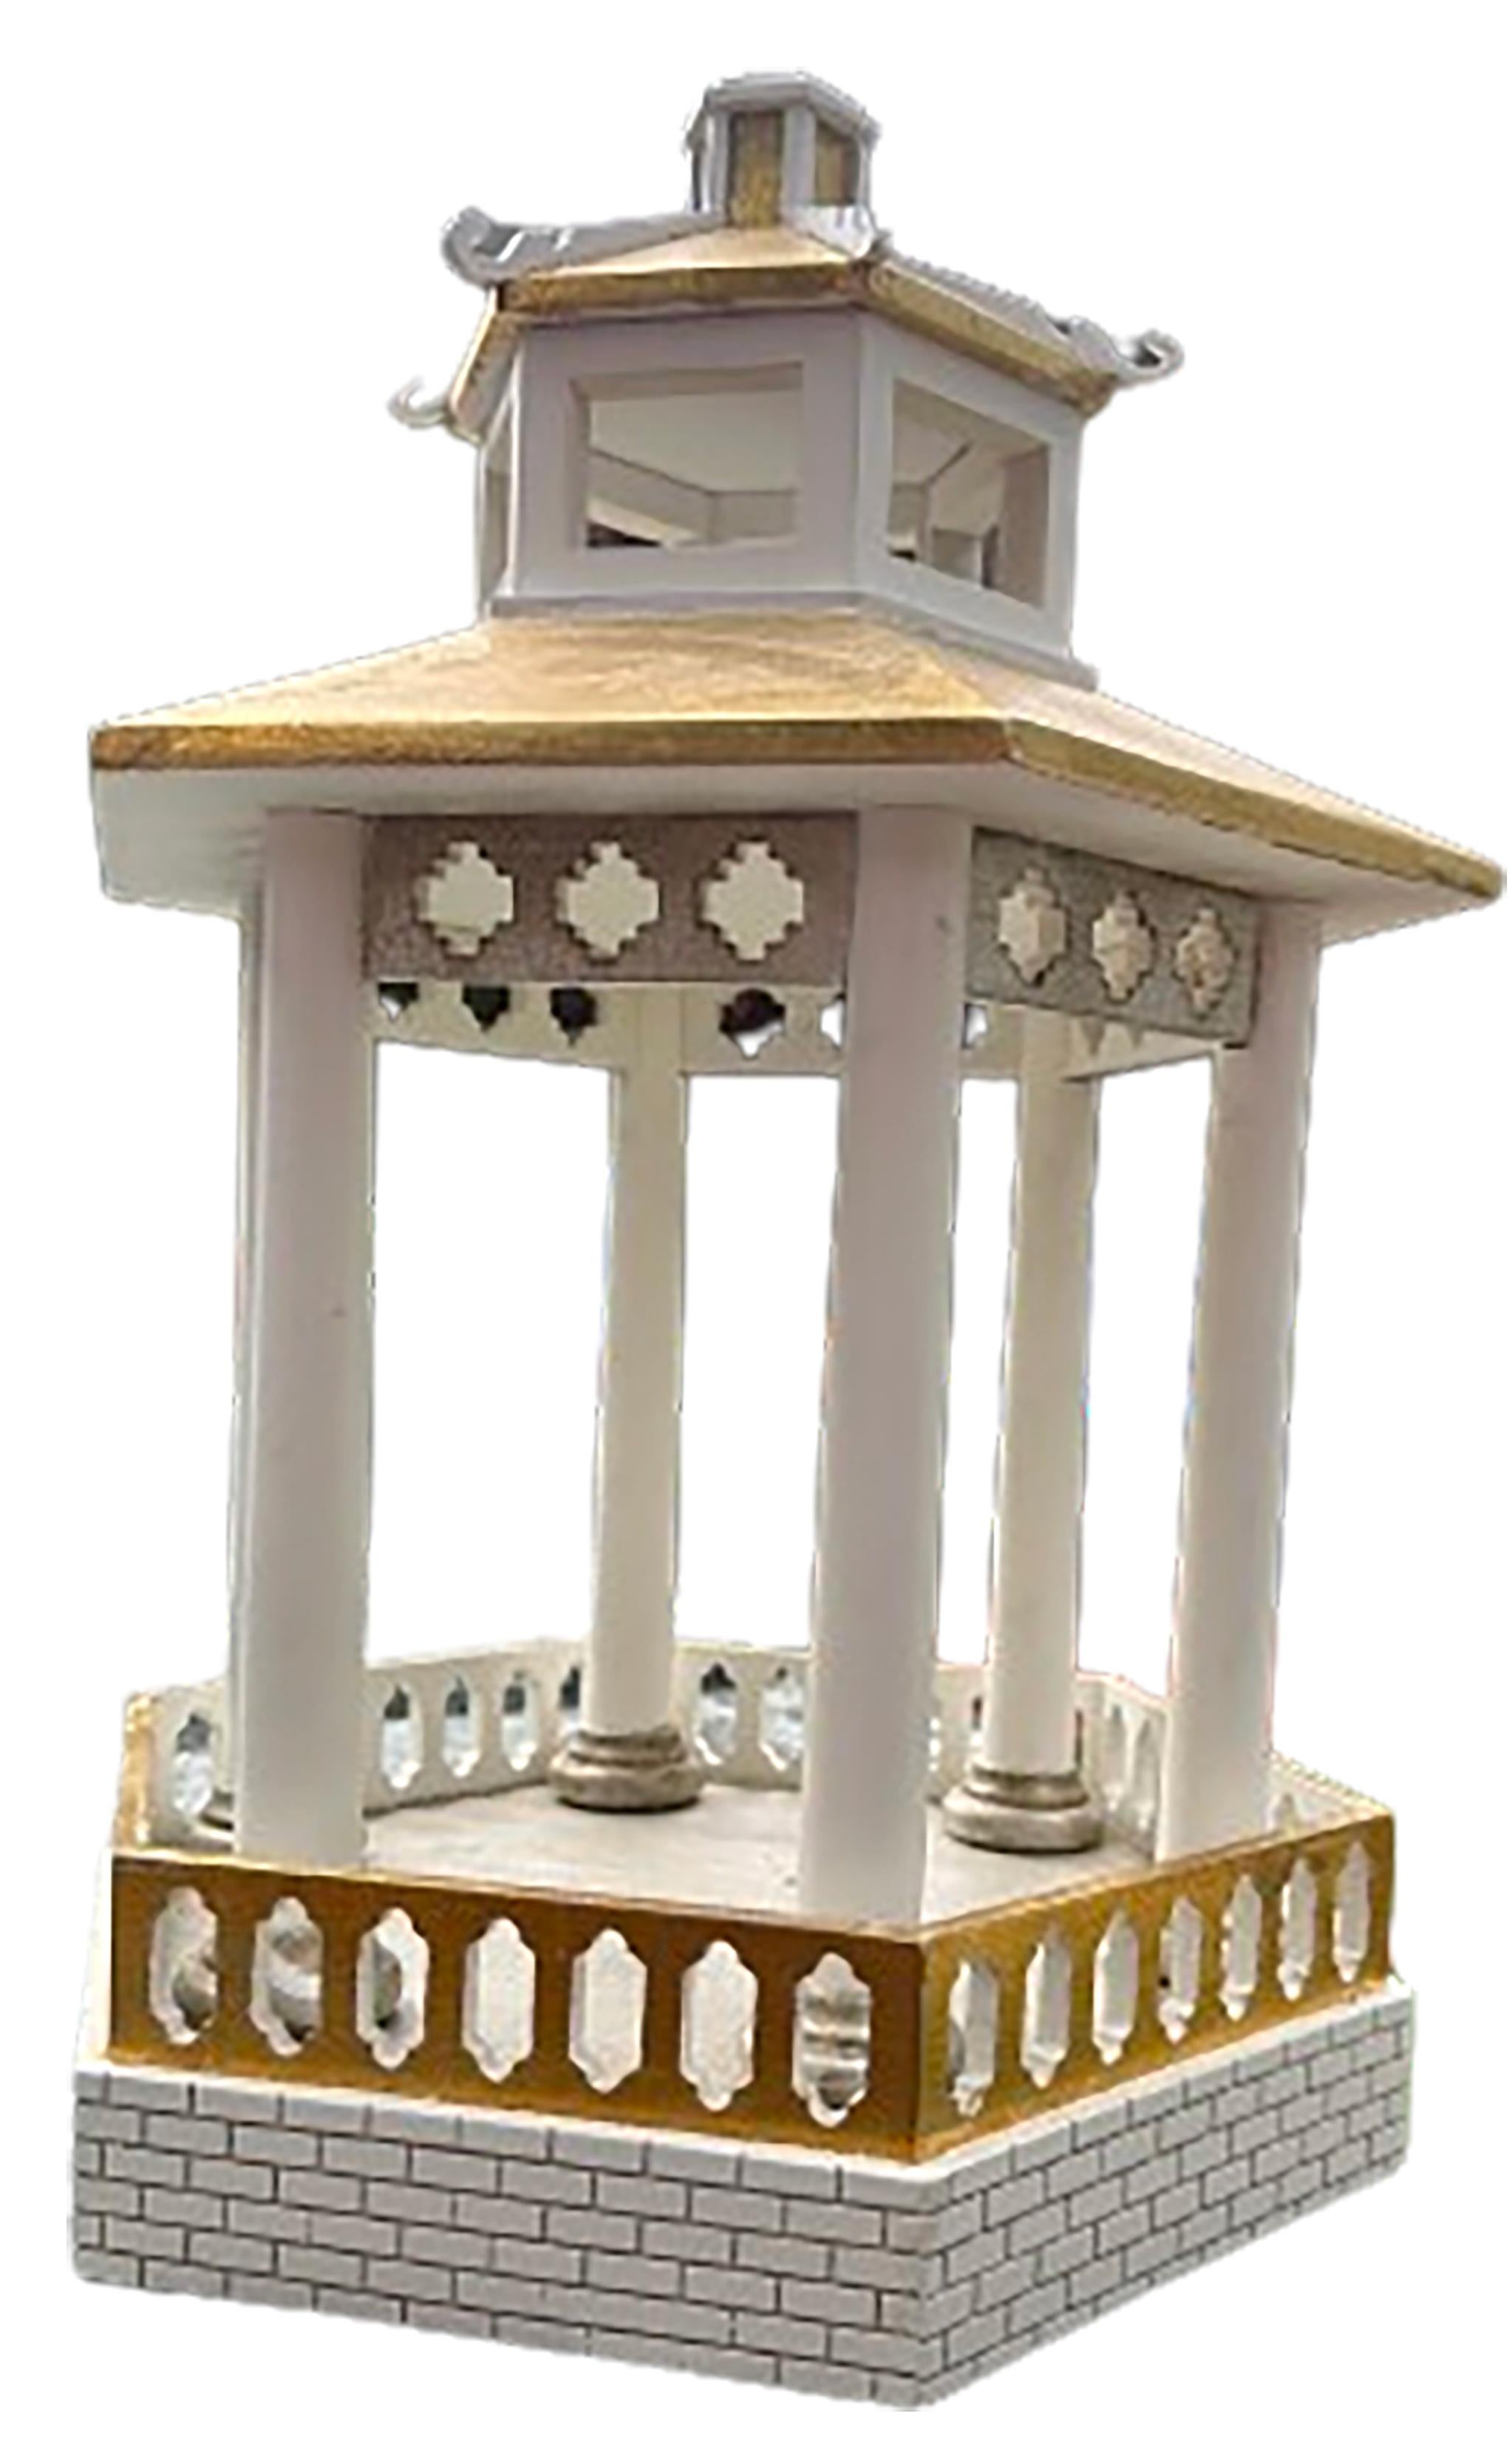 A pair of custom-made hand-gilt classical pagoda models. Hand painted white columns and minor trim features. The roof, top, and lower fence of the model have a wonderful hand gilt sheen. Originally created for the Dallas Museum of Art’s Silver